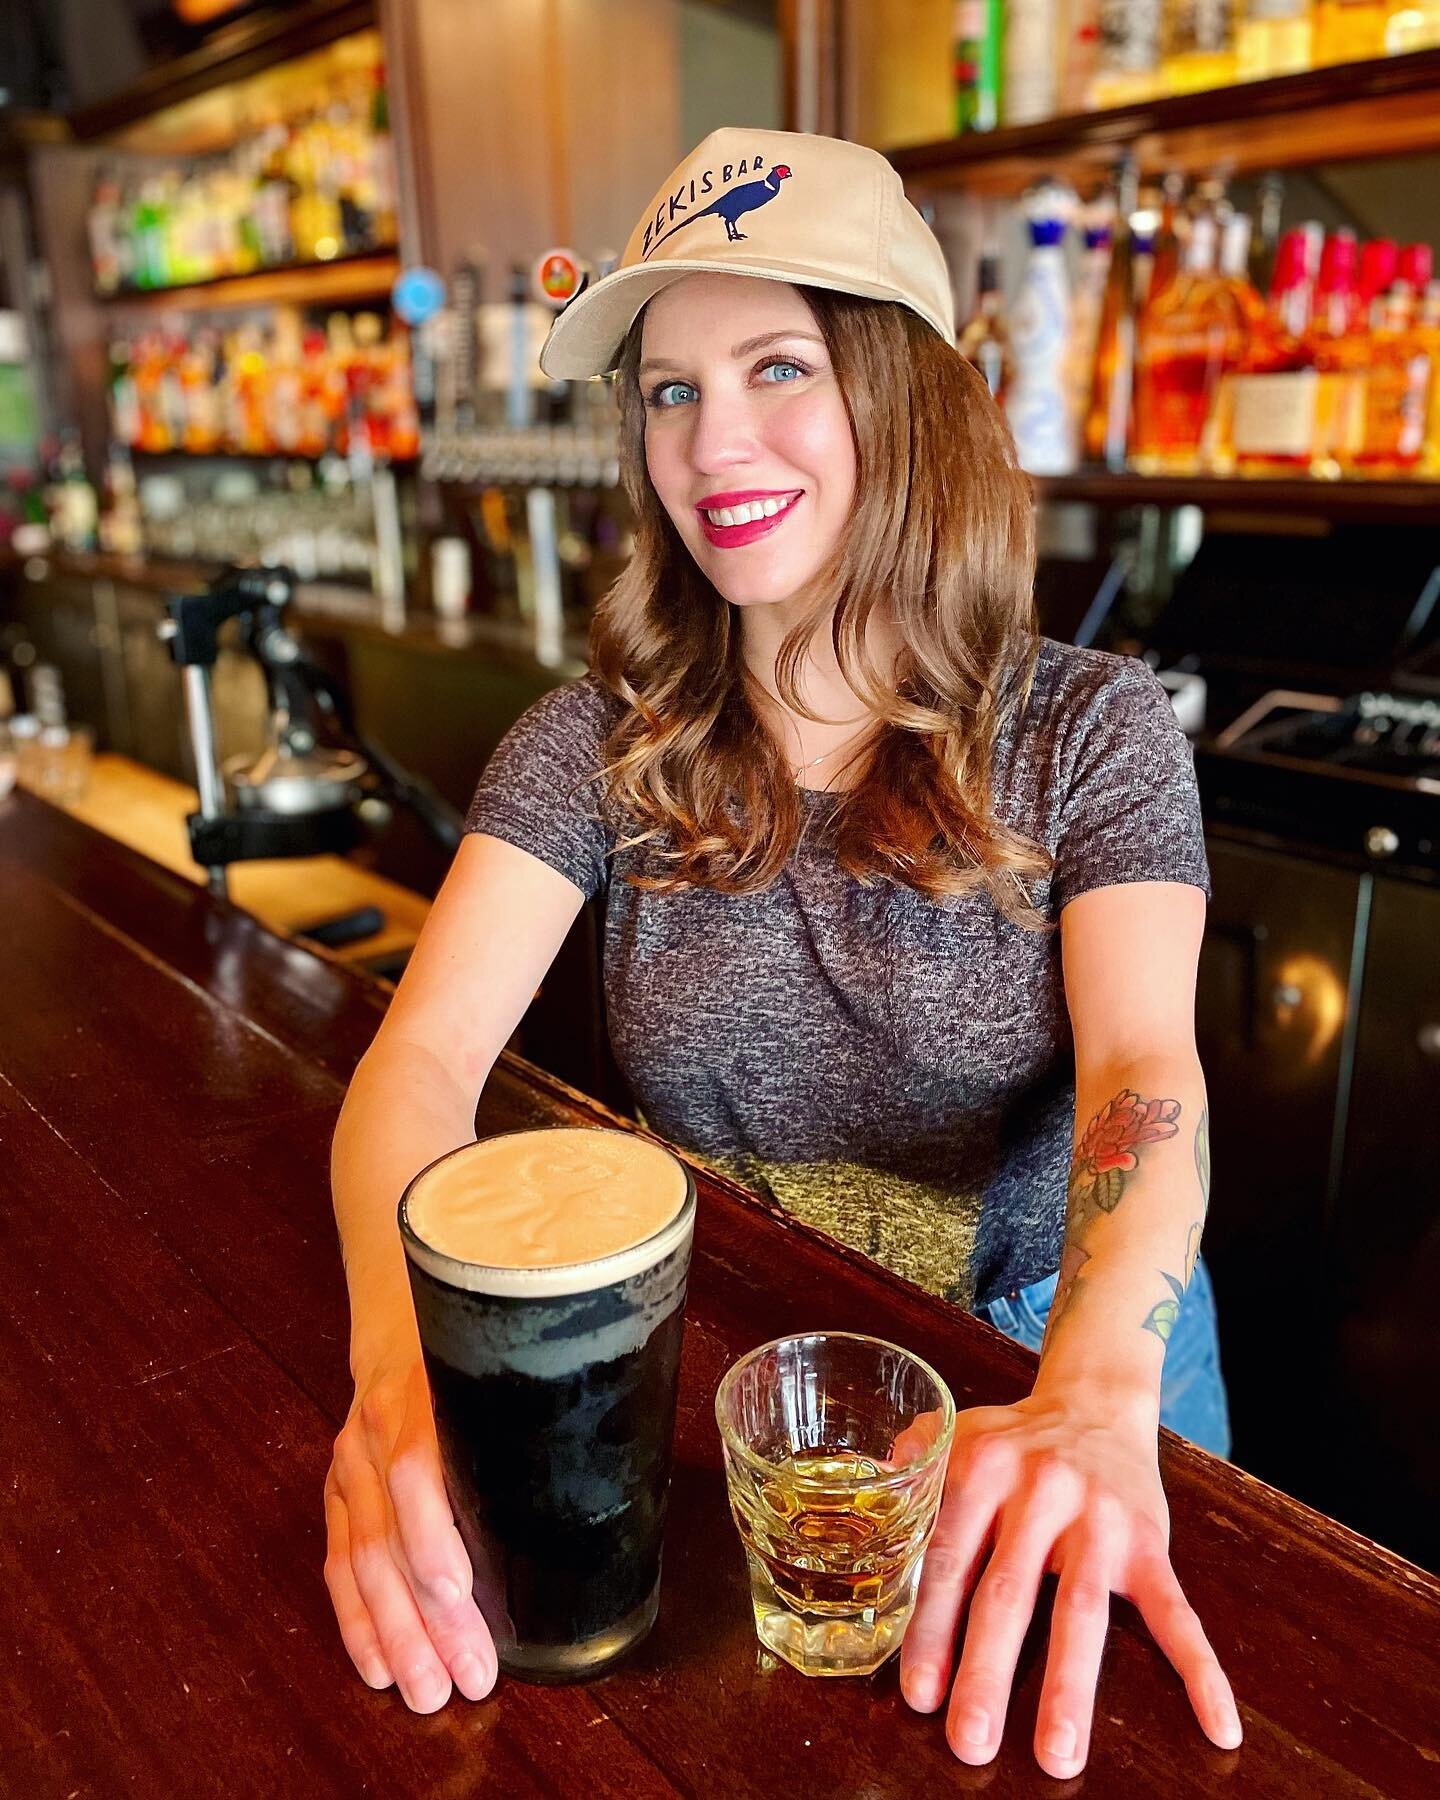 Enjoy this perfect pairing Friday for St. Patrick&rsquo;s Day! Zeki&rsquo;s will also be opening at noon for March Madness&hellip; Hoops and Jamies baby!

#stpatricksday #nobhill #marchmadness #guiness #jameson #happyhour #zekisbar #whisky